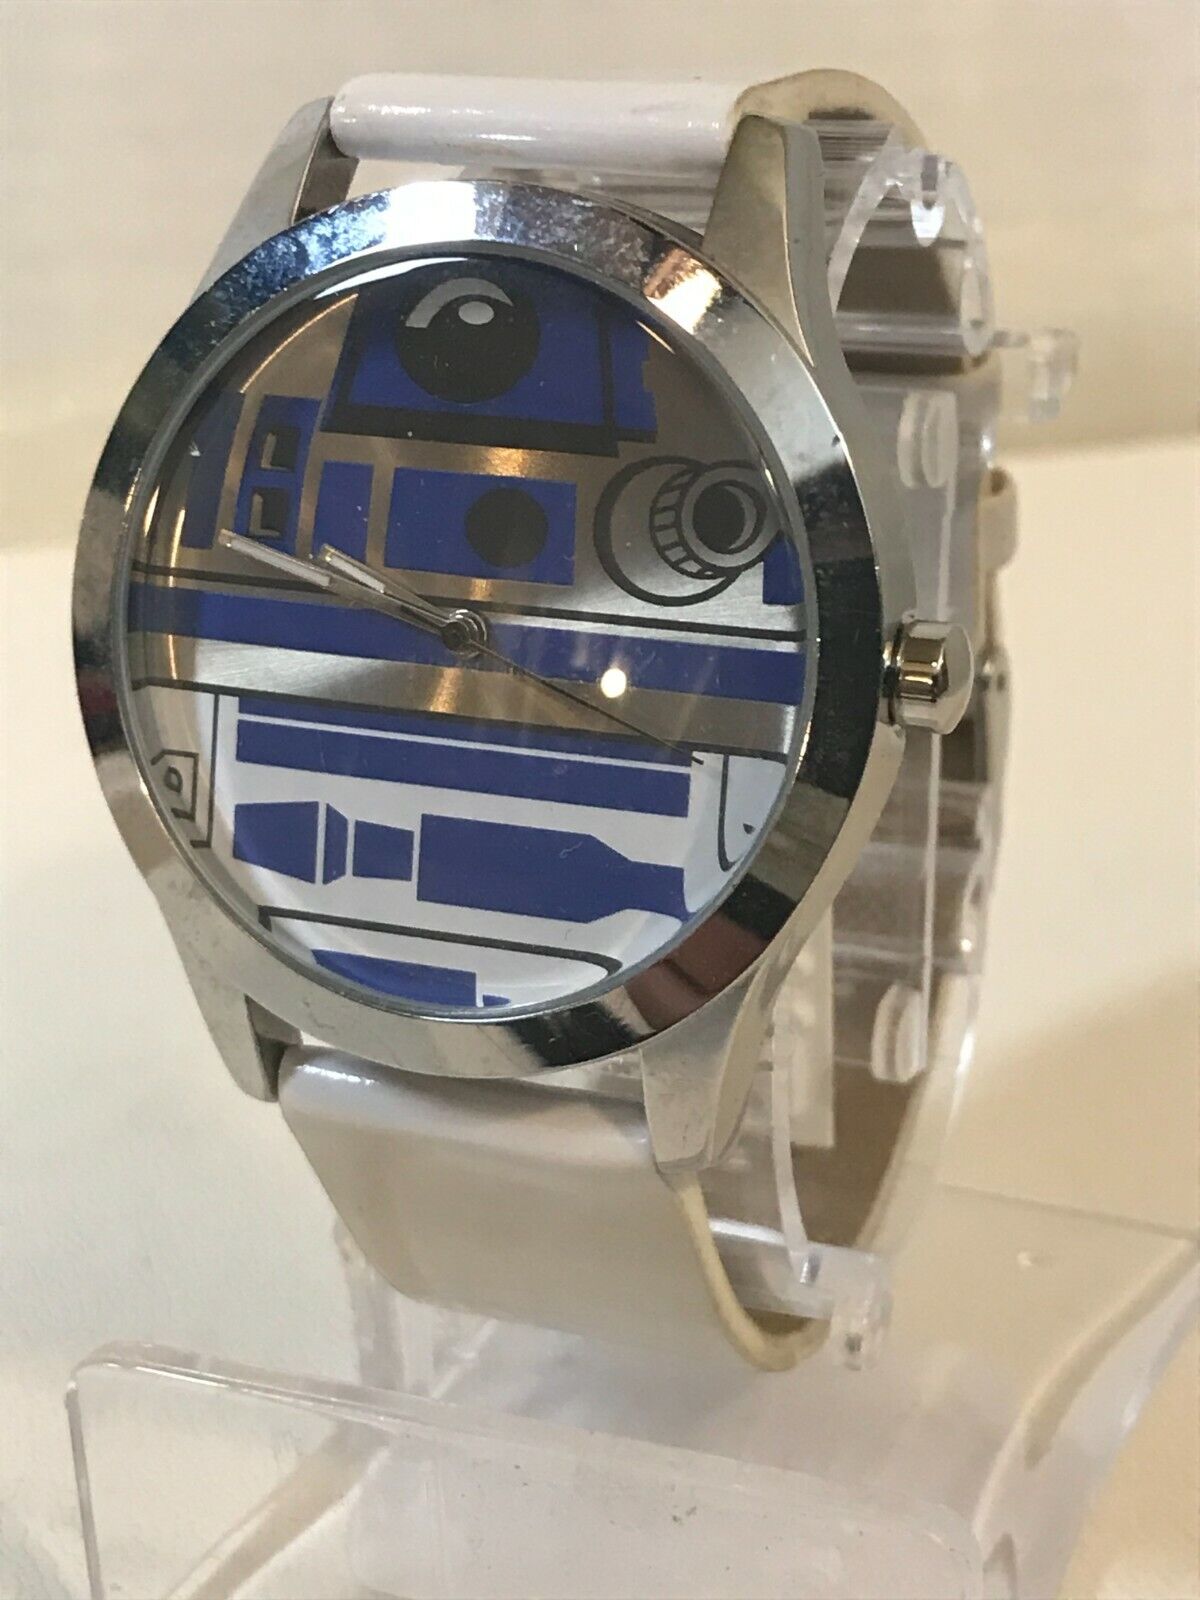 Zeon Star Wars Watch R2D2 untested needs battery as-is White strap collectible